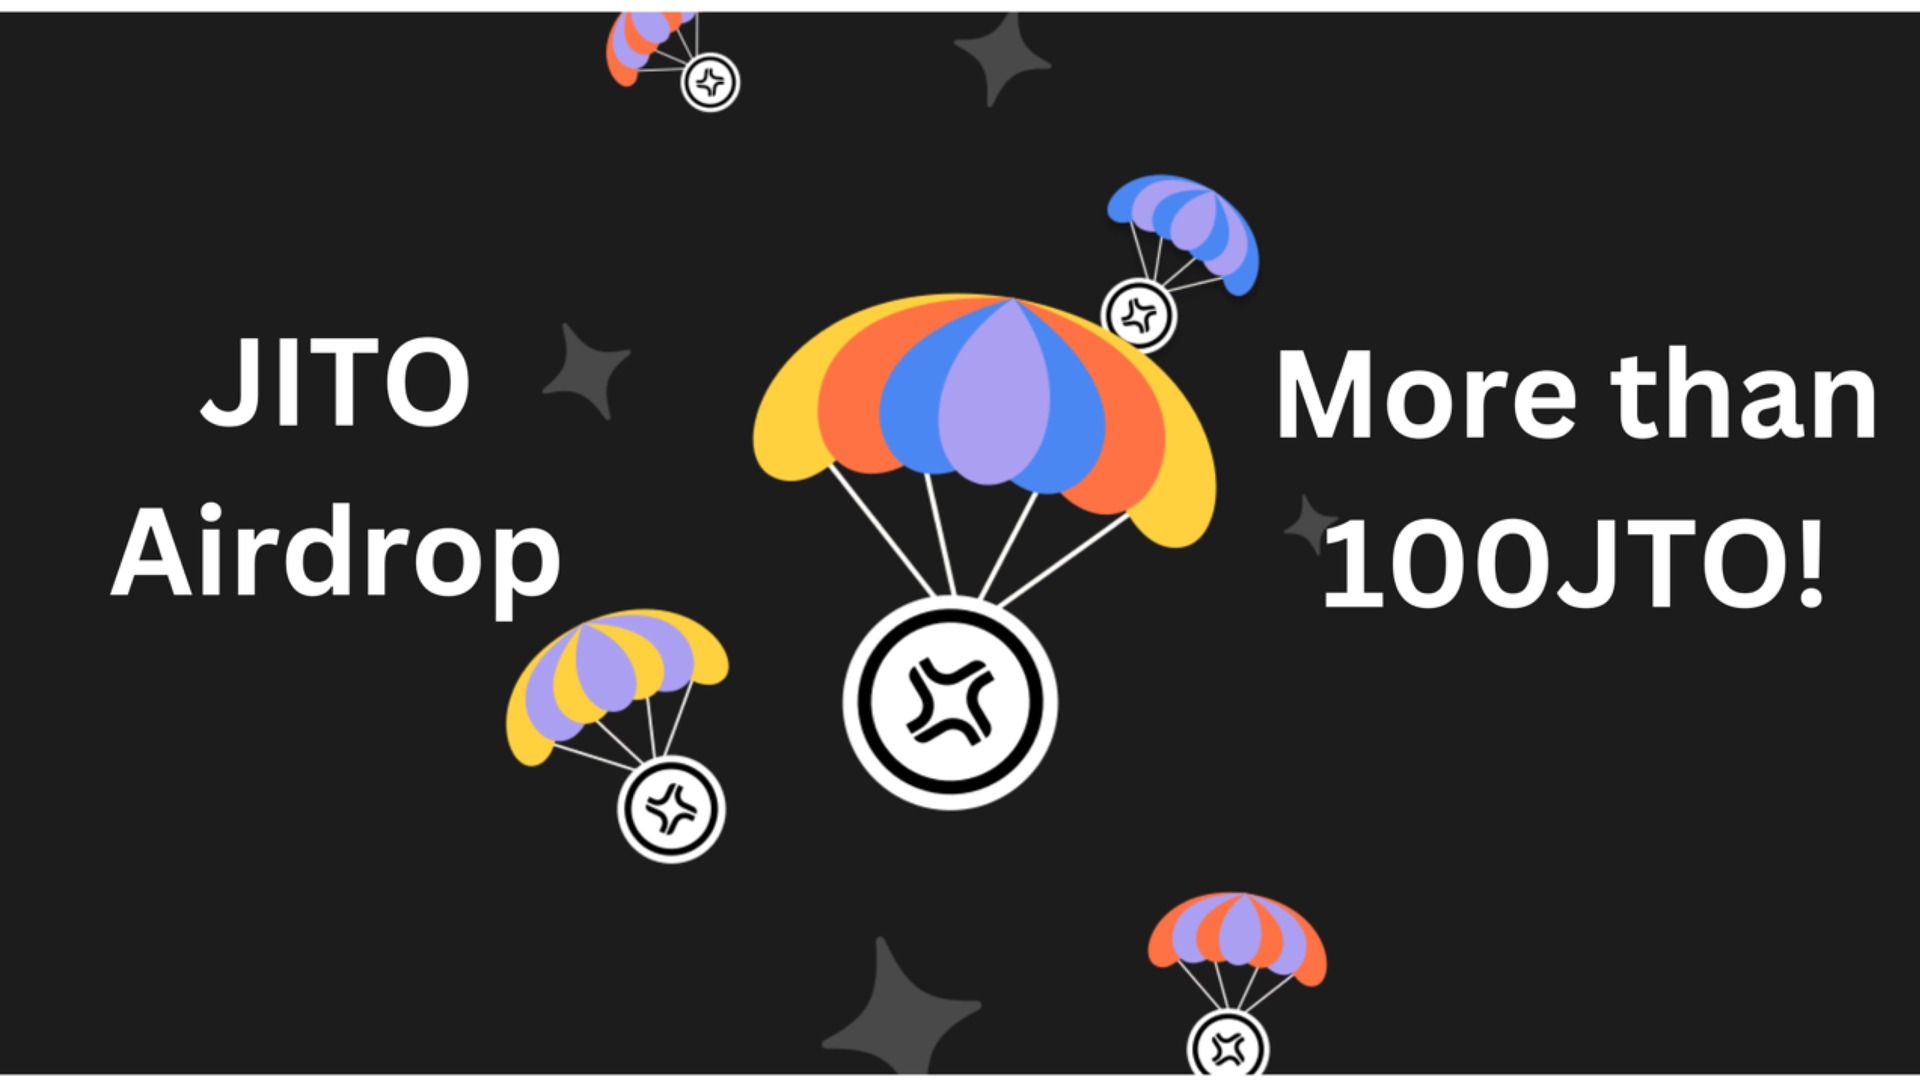 Claim Your 100 JTO for Free Now: Participate in the Jito Airdrop!